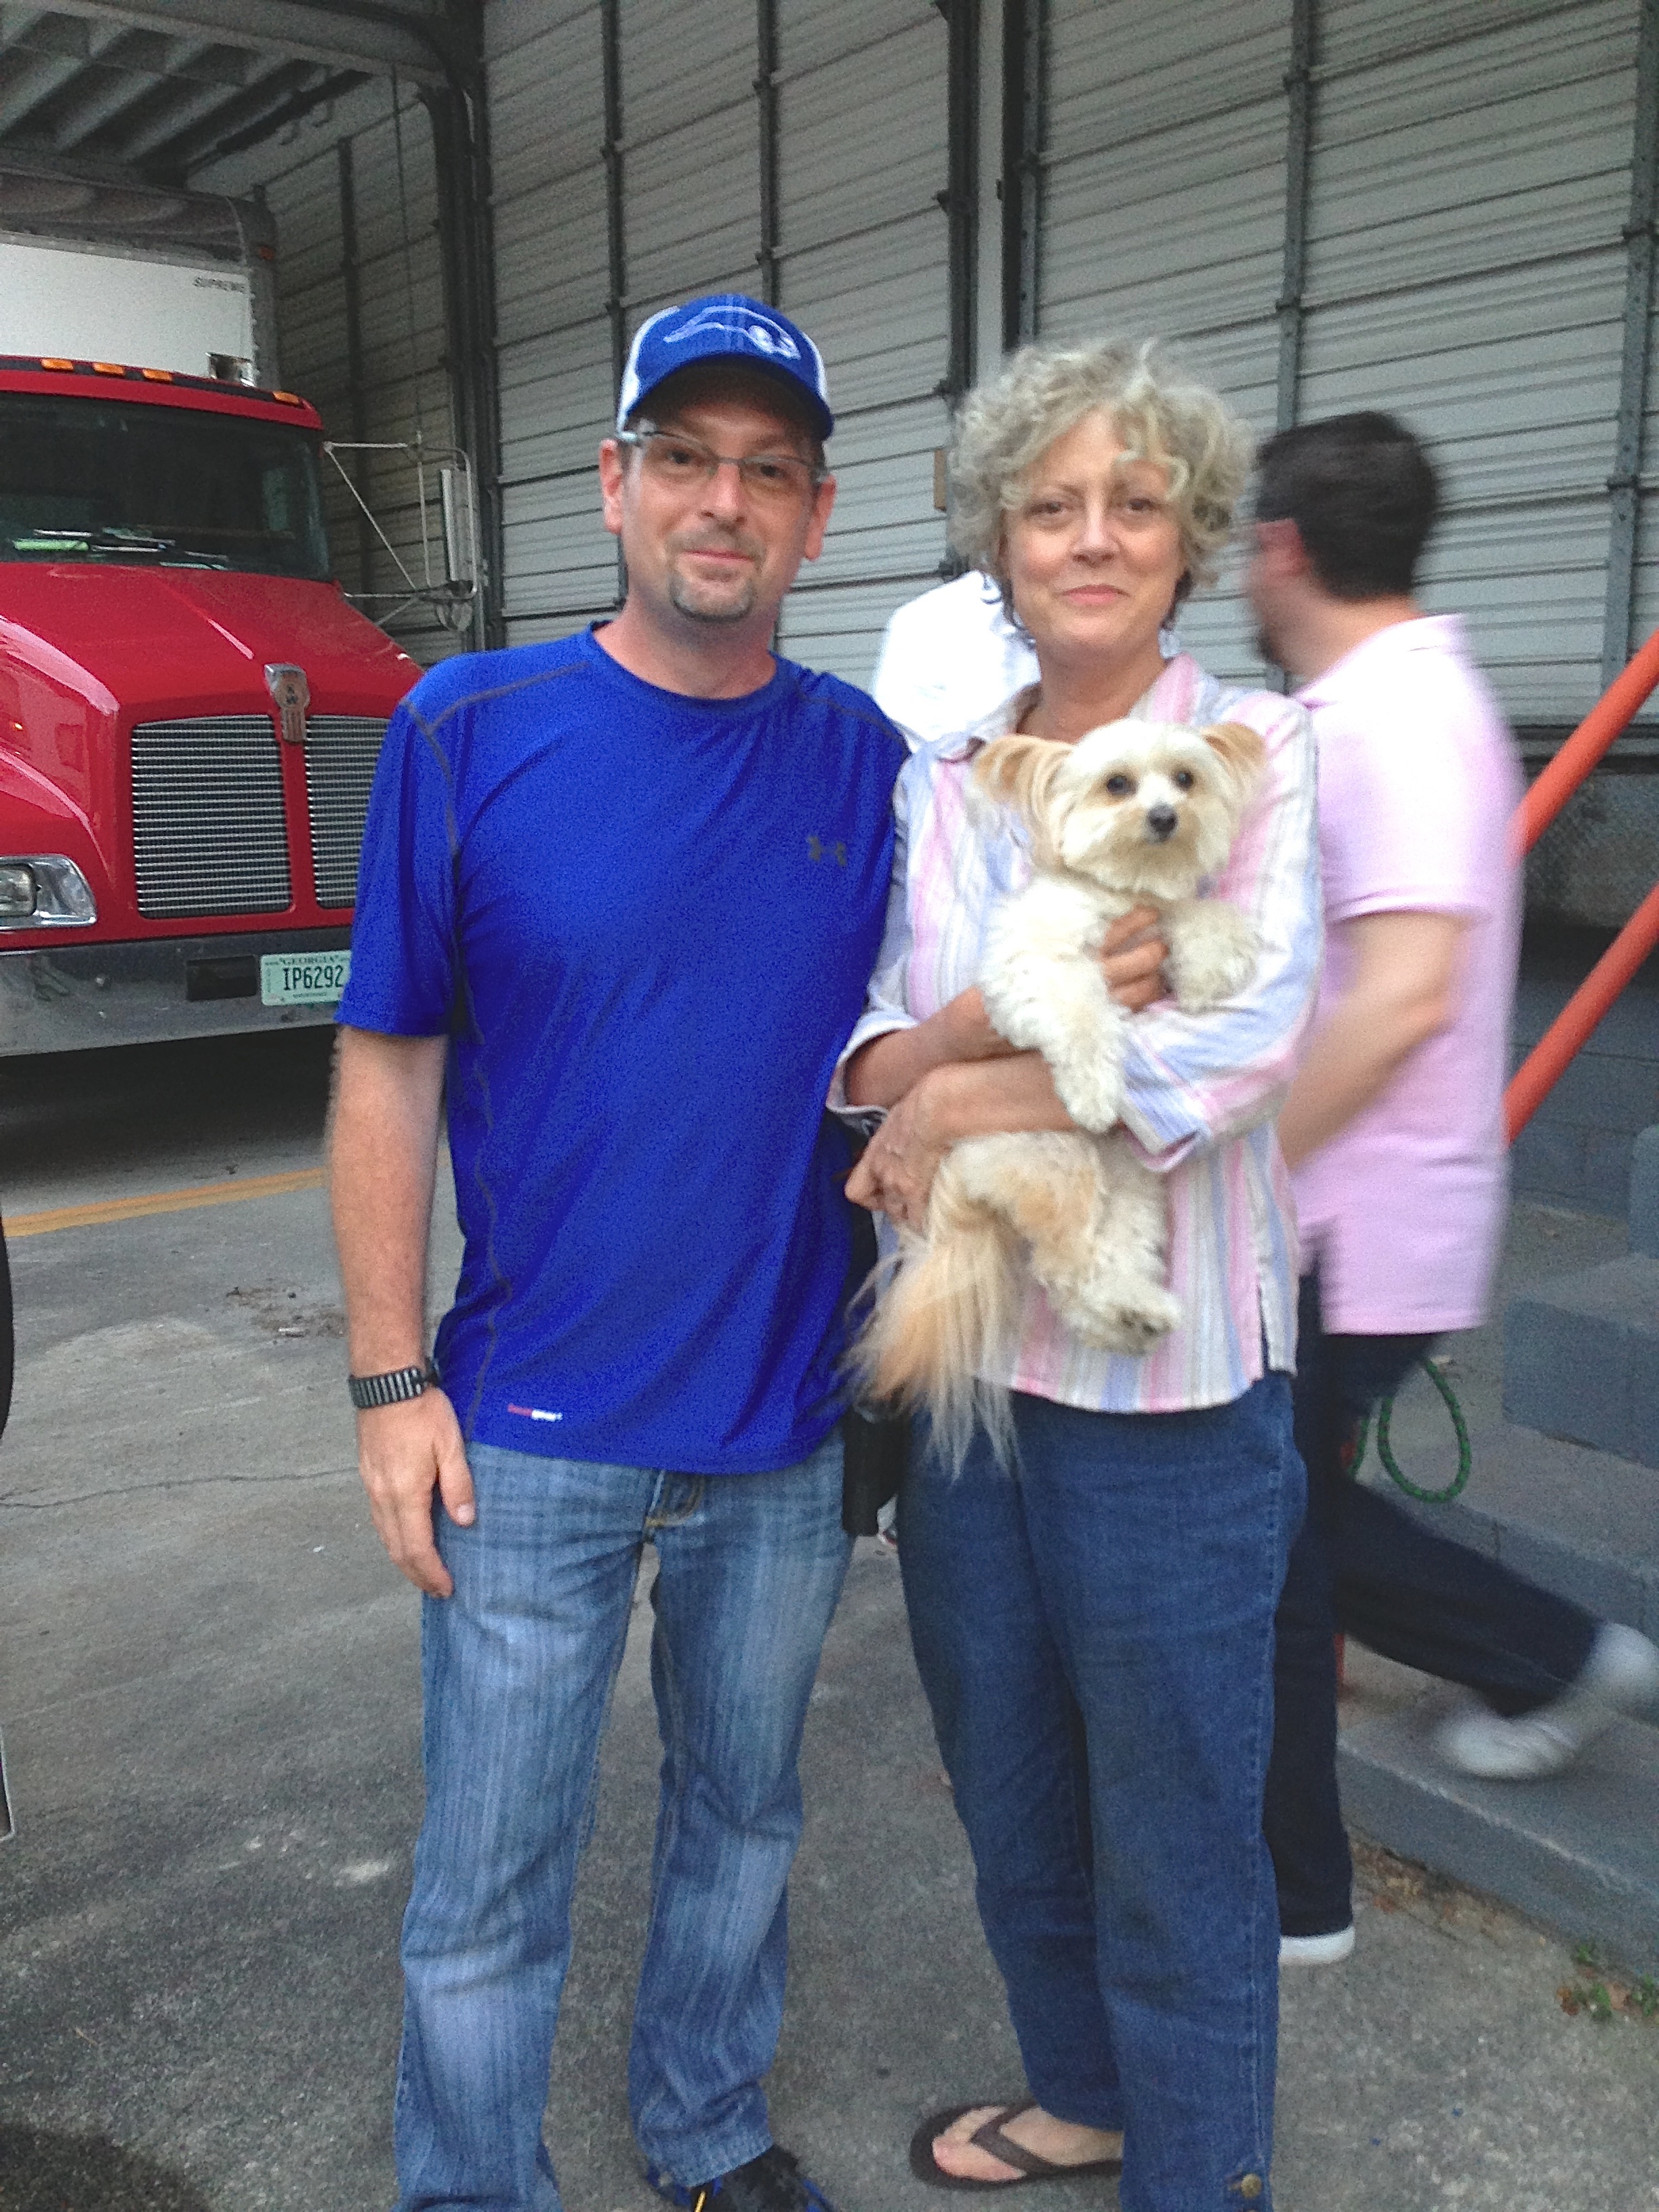 Location Manager Mike Hewett, and Susan Sarandon, on location in Wlmington, N.C. for the upcoming feature film 